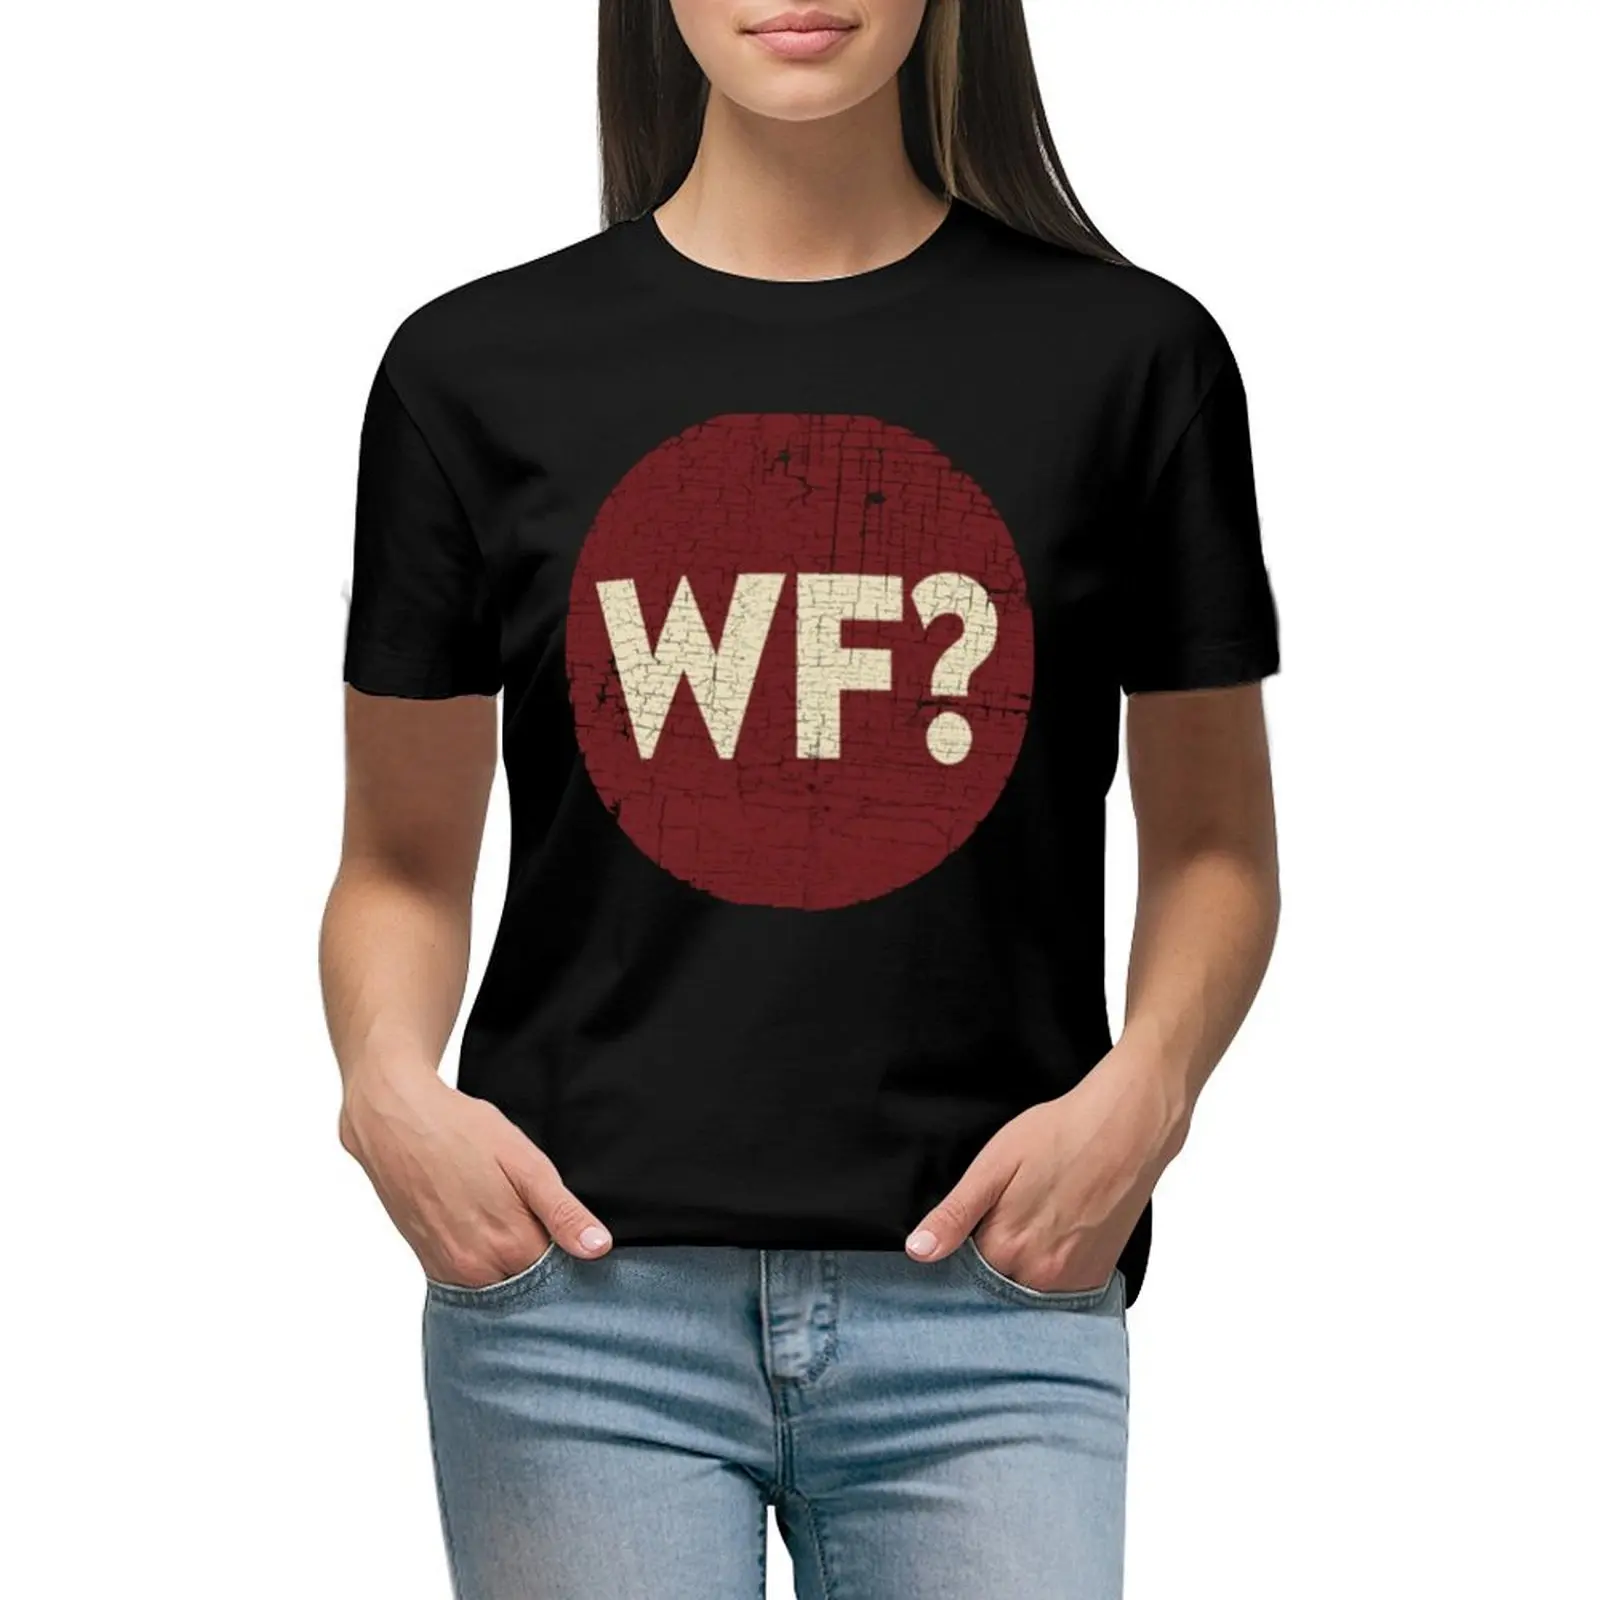 

The Why Files Logo Vintage Distressed T-shirt cute clothes graphics rock and roll t shirts for Women